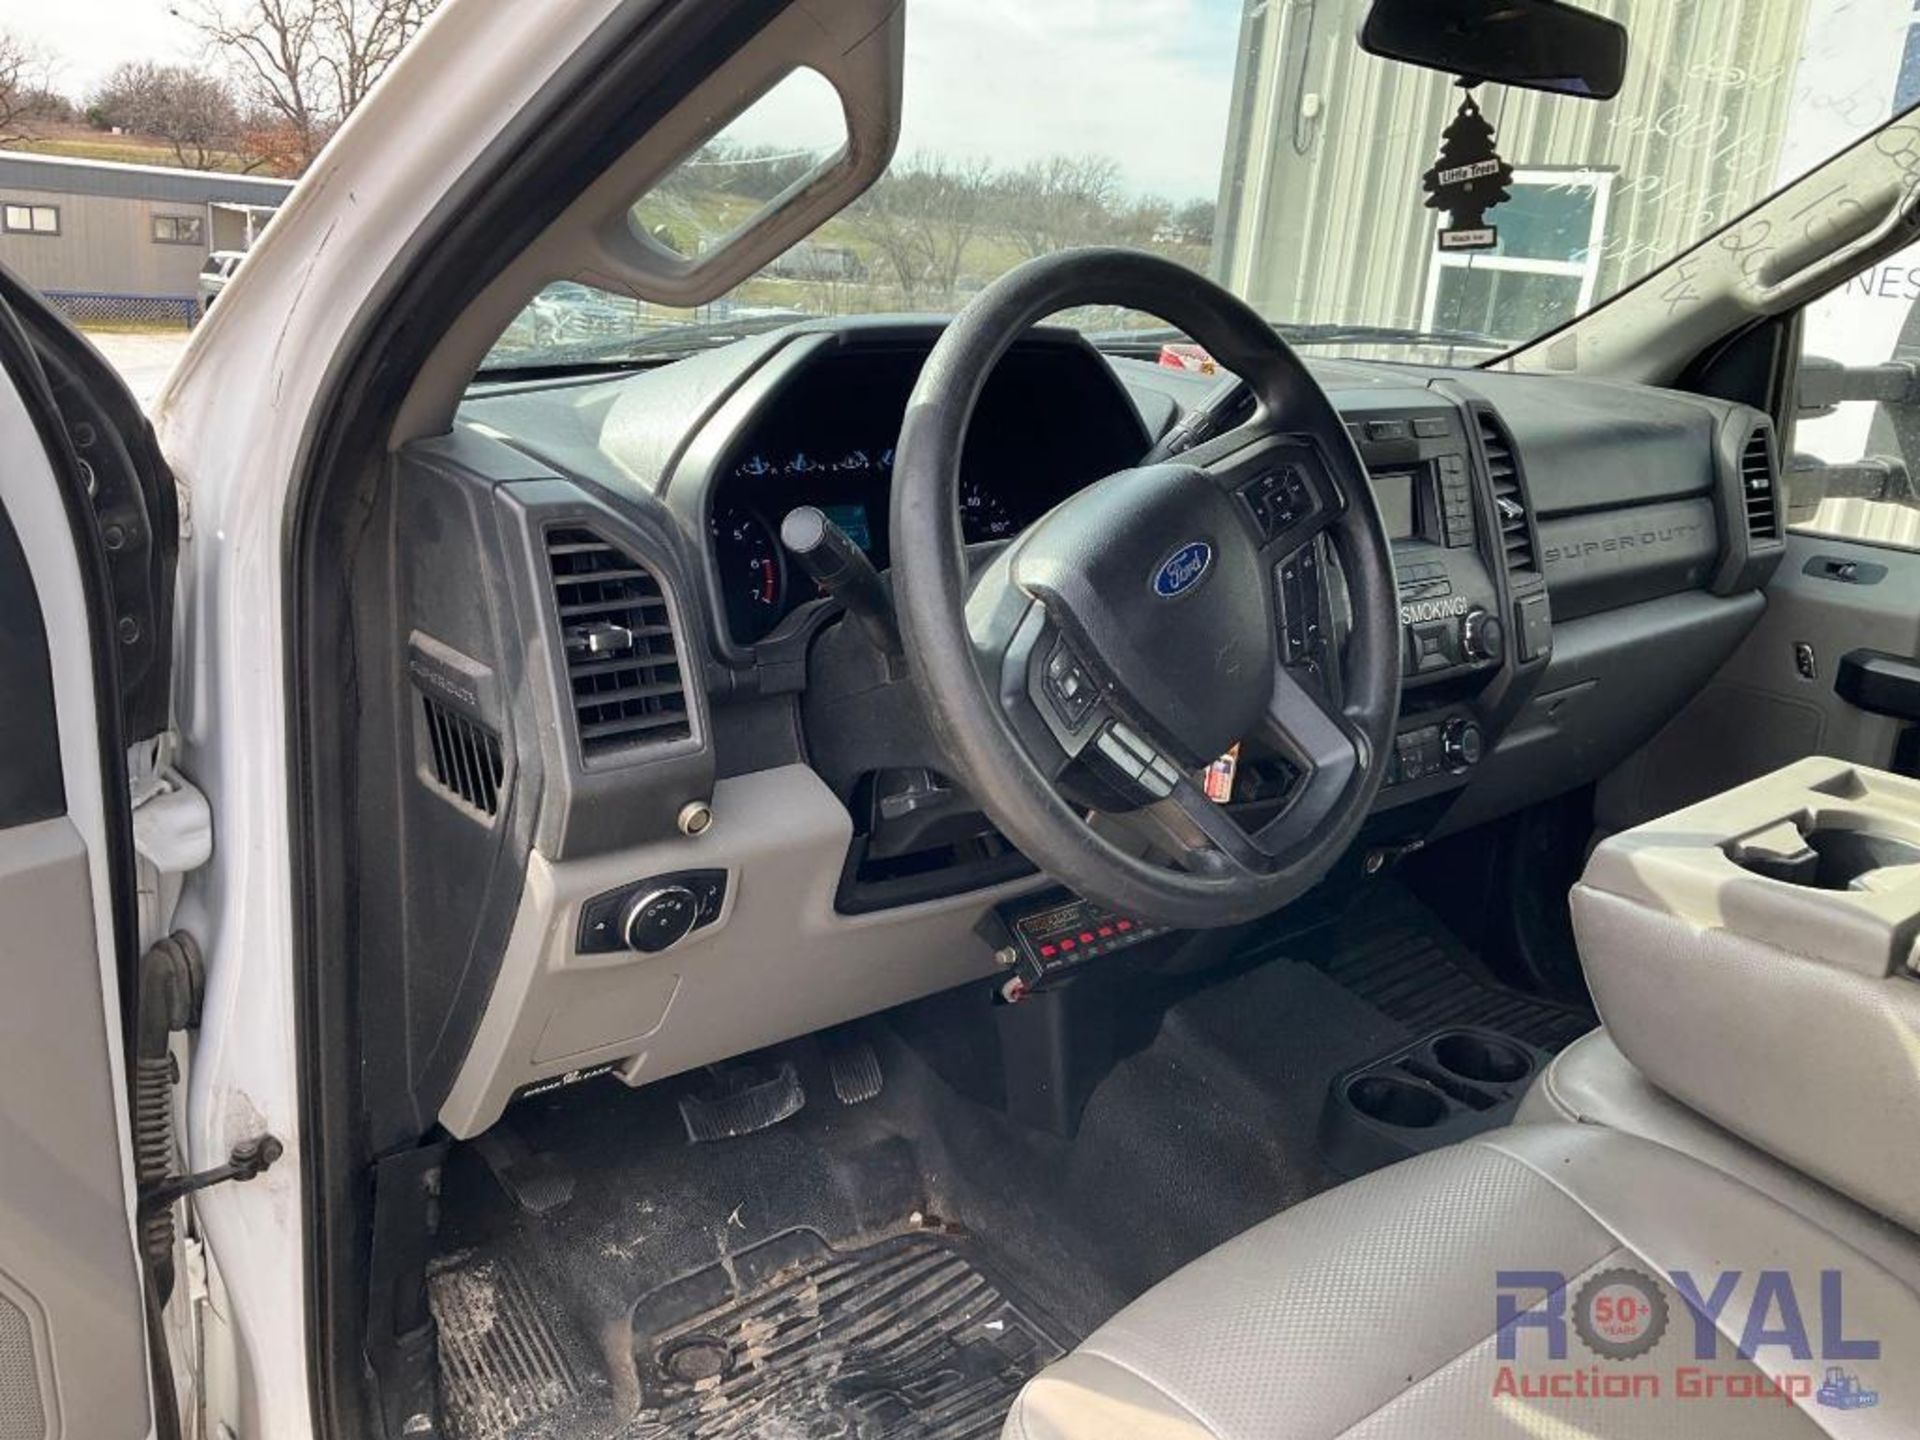 2019 Ford F250 4x4 Crew Cab Pickup Truck - Image 19 of 27